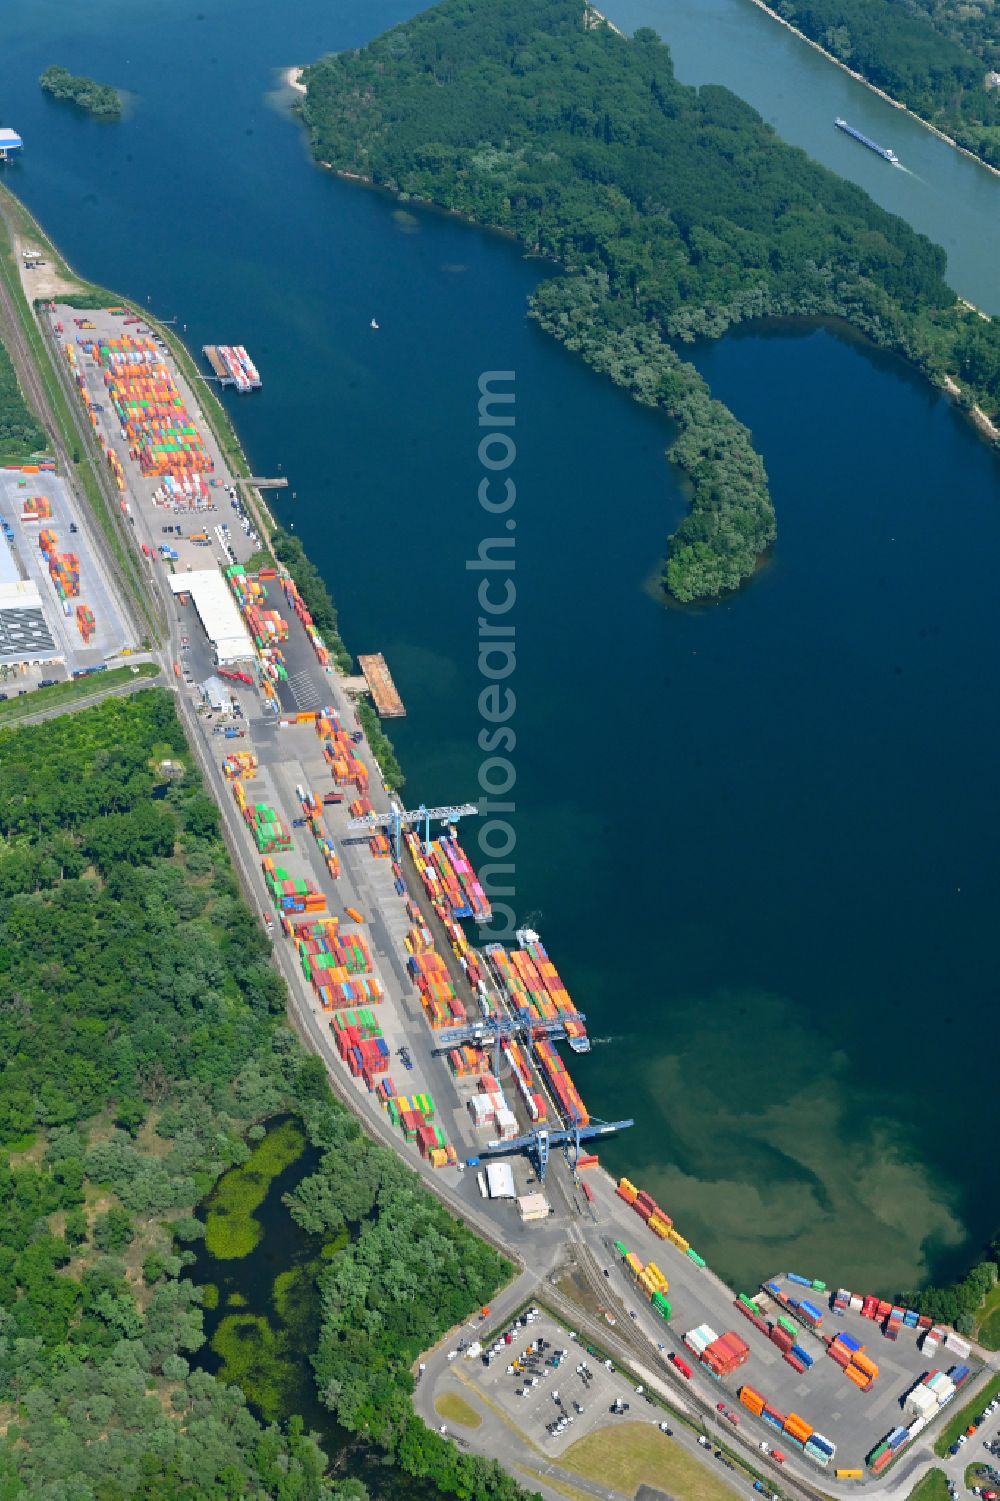 Wörth am Rhein from above - Container terminal in the container port of Contargo Woerth-Karlsruhe GmbH on the lake of the Landeshafen in the district Industriegebiet Woerth-Oberwald in Woerth am Rhein in the state Rhineland-Palatinate, Germany